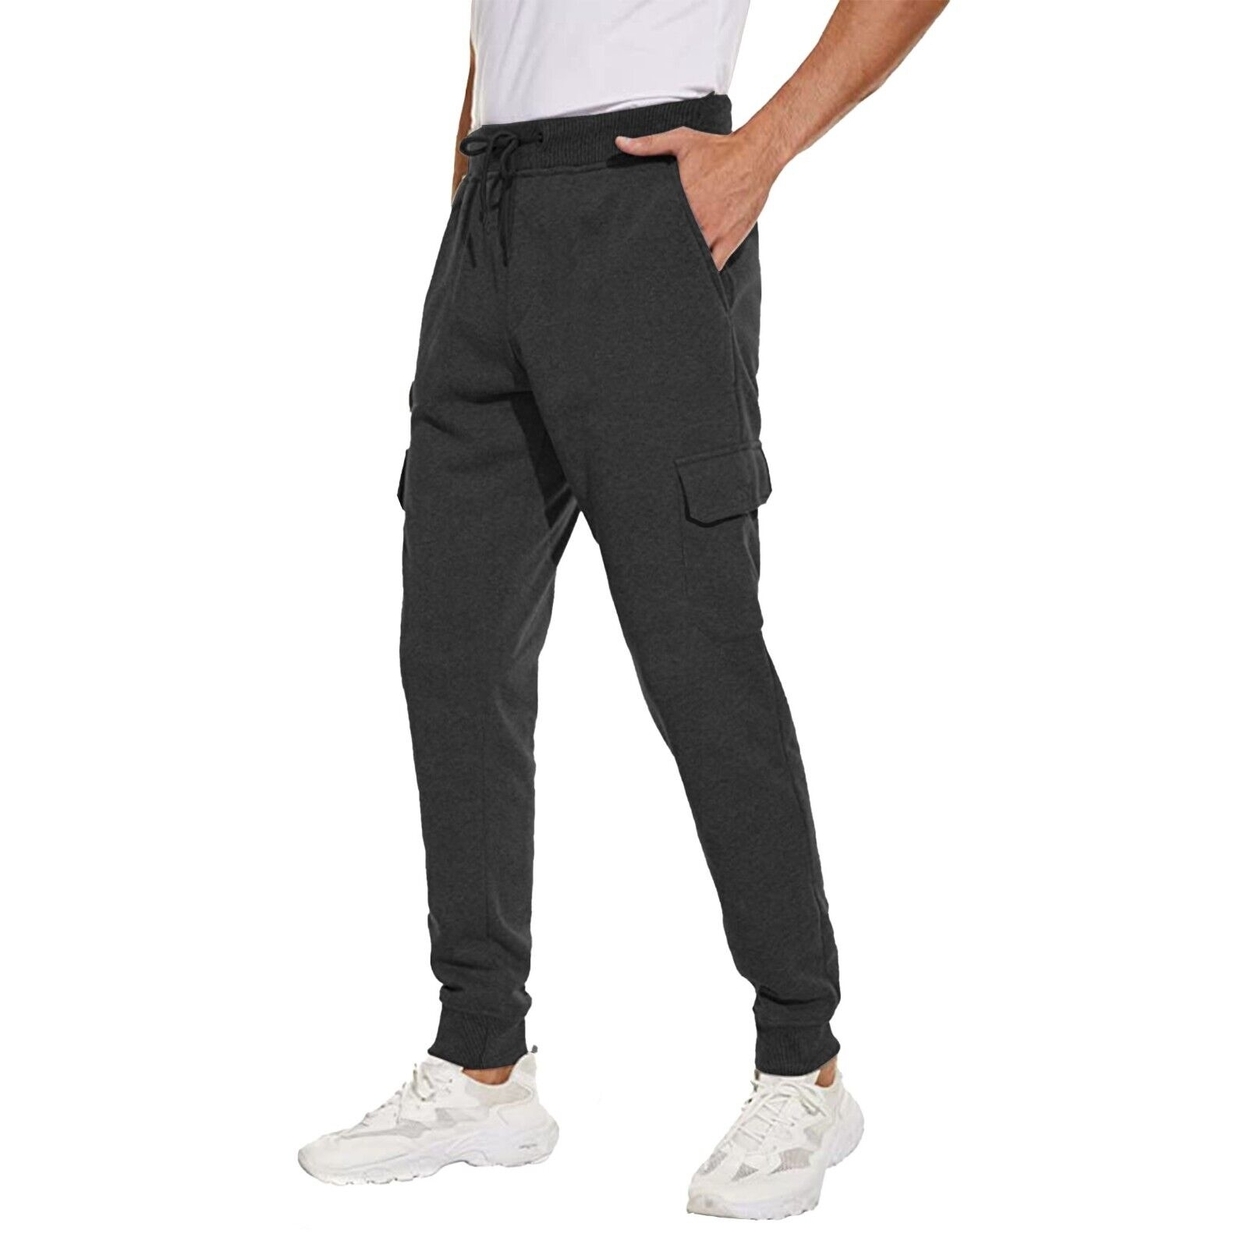 Men's Ultra Soft Winter Warm Thick Sweat Pant Athletic Sherpa Lined Jogger Pants - Charcoal, Xx-large